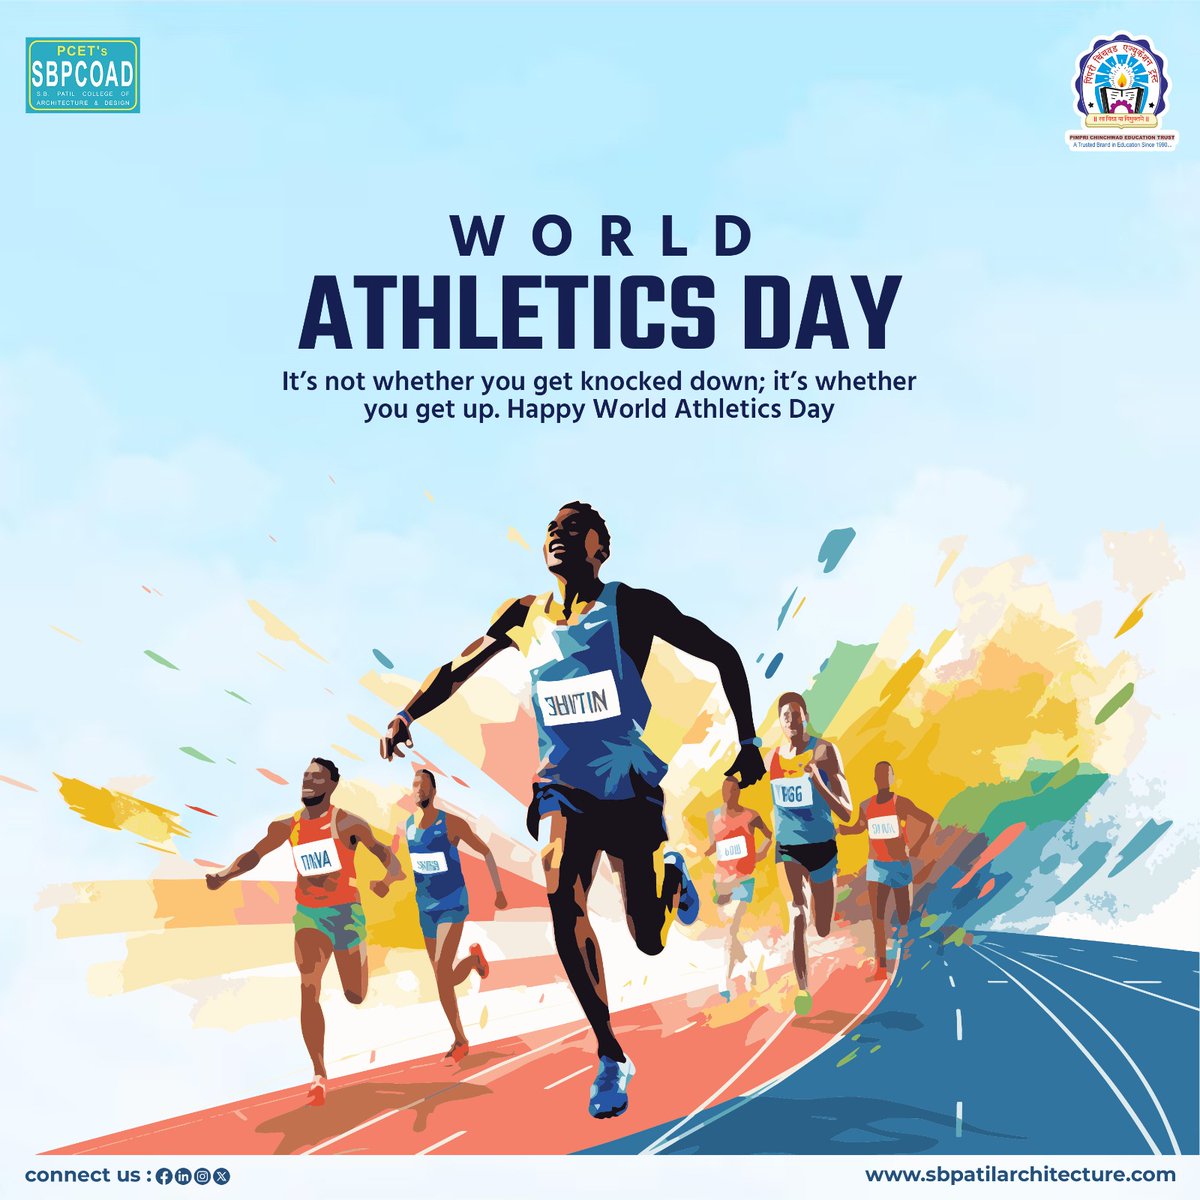 On this world athletics day, let's Focus on building a true sportsmanship spirit towards achieving a successful life. Happy World Athletics Day !! #PCET #SBPCOAD #WorldAthleticsDay #Athletics #WorldAthleticsDay2024 #sports #athlets #trending #FutureStars #worldchampionship